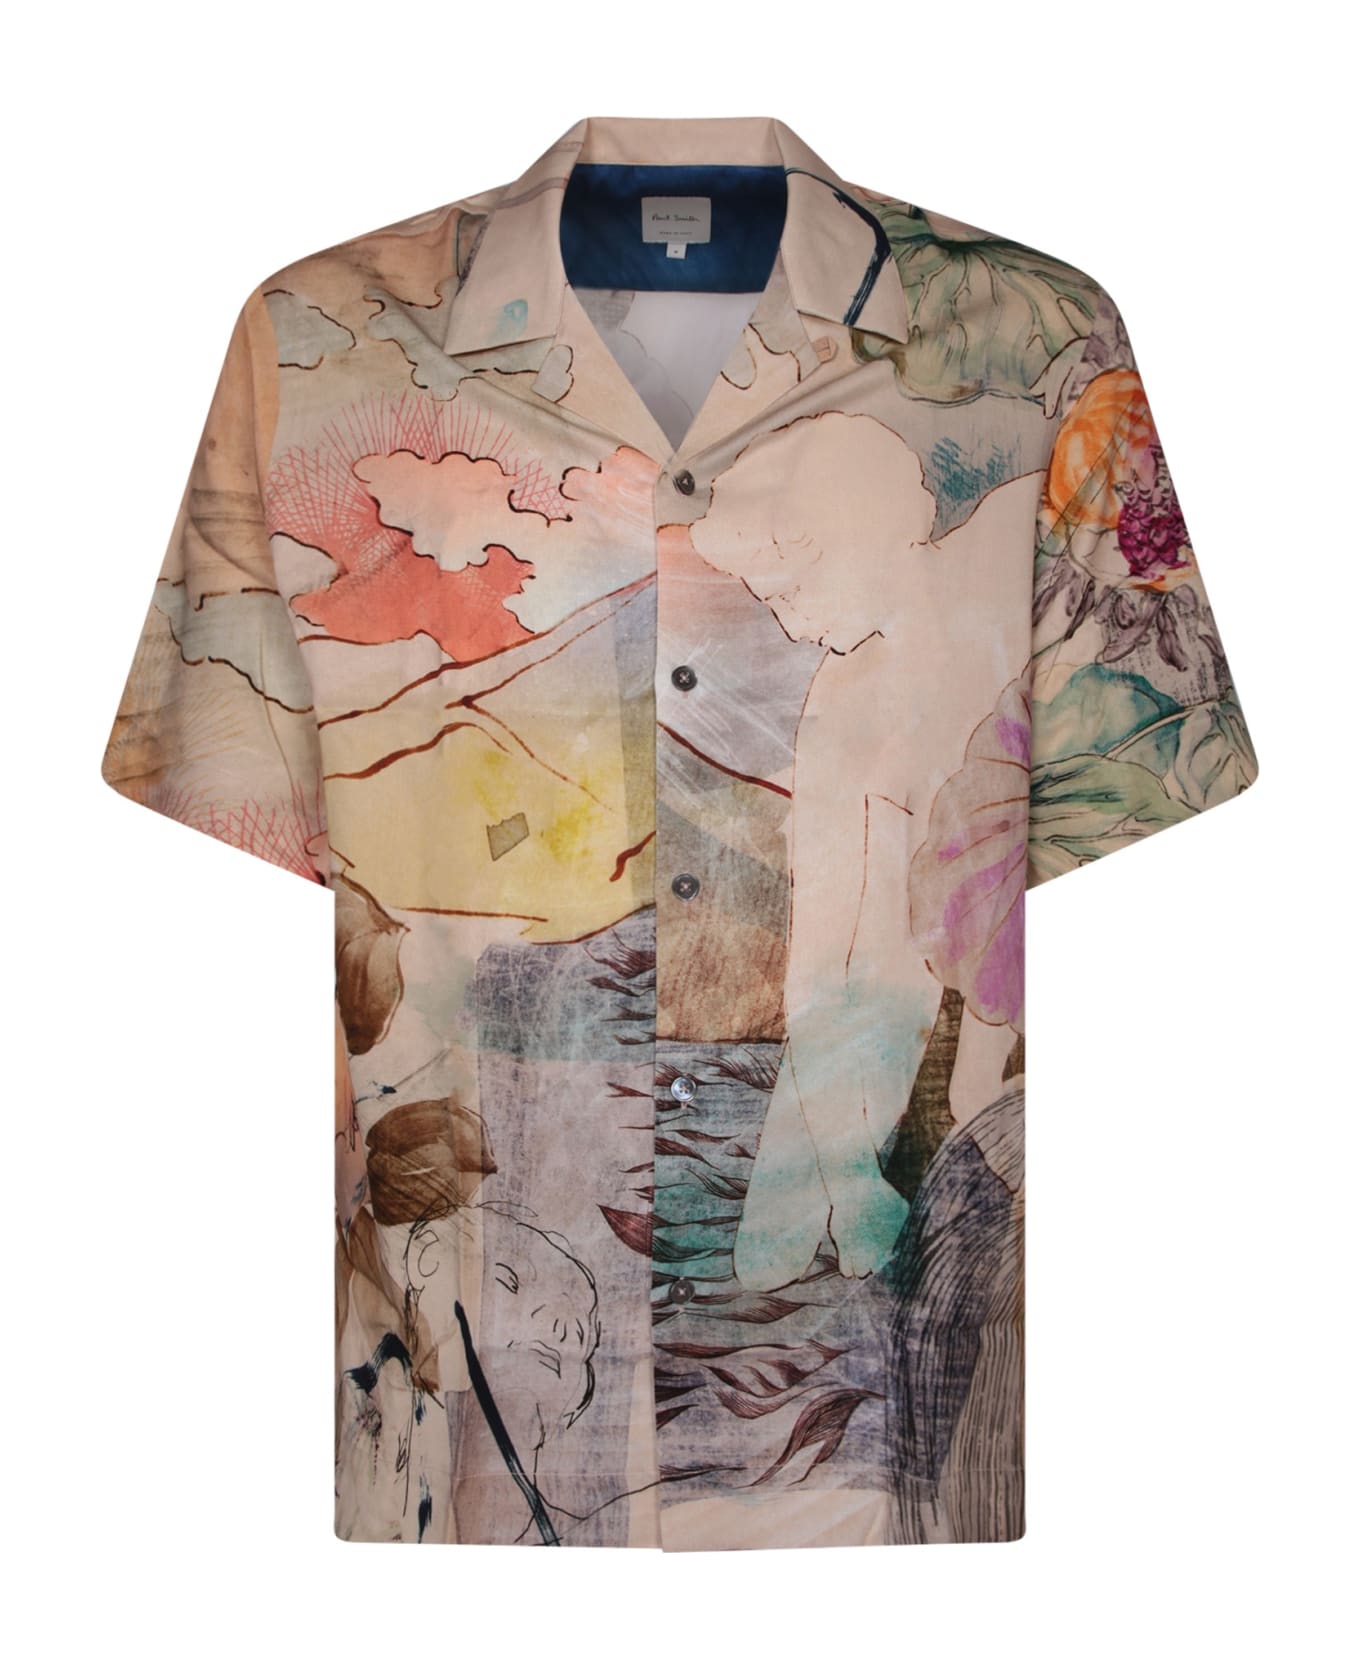 Paul Smith Graphic Printed Short-sleeved Shirt - Beige シャツ